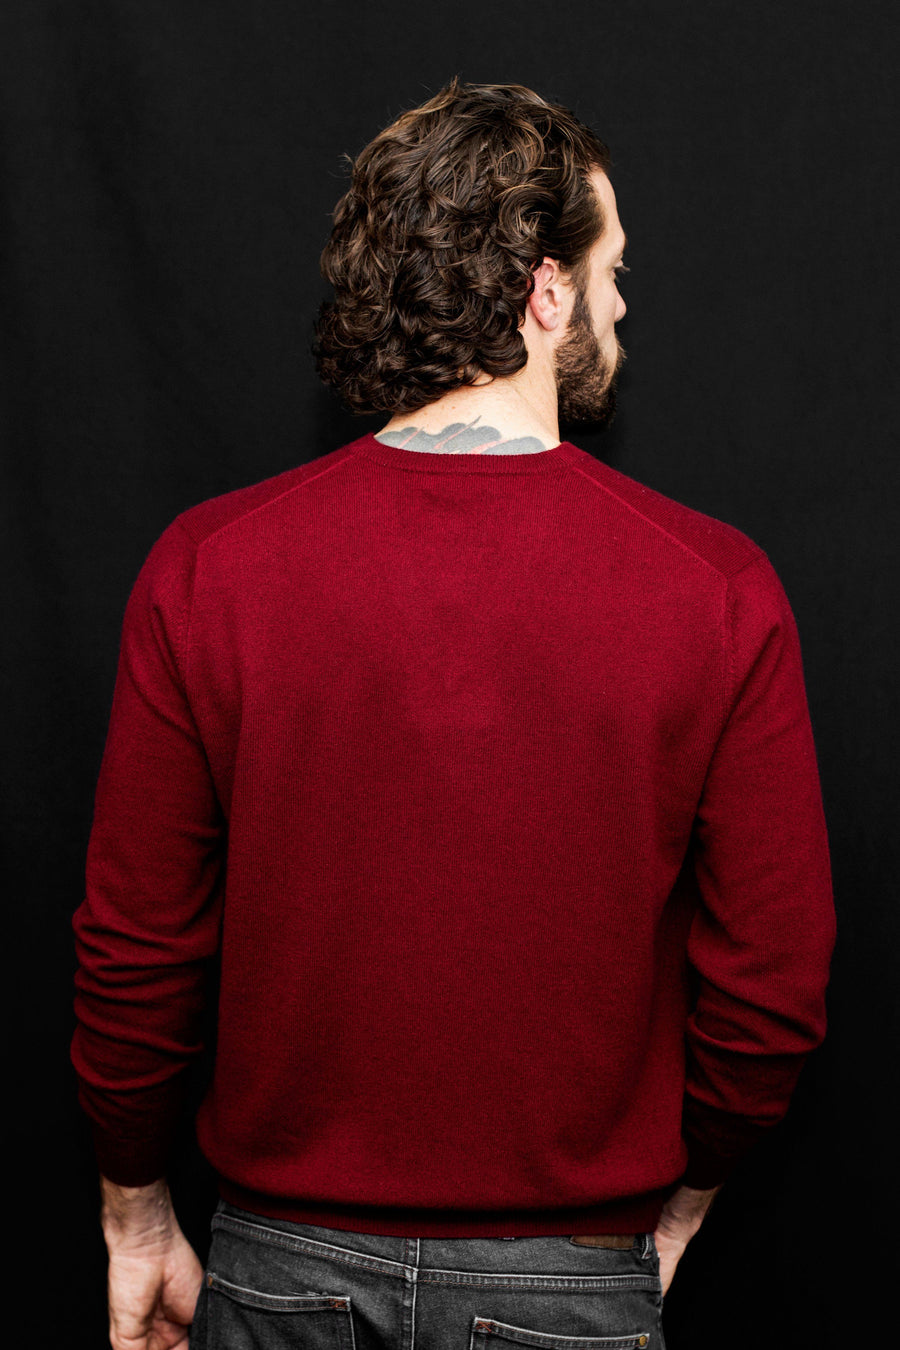 pine cashmere mens classic 100% pure cashmere v neck sweater in red